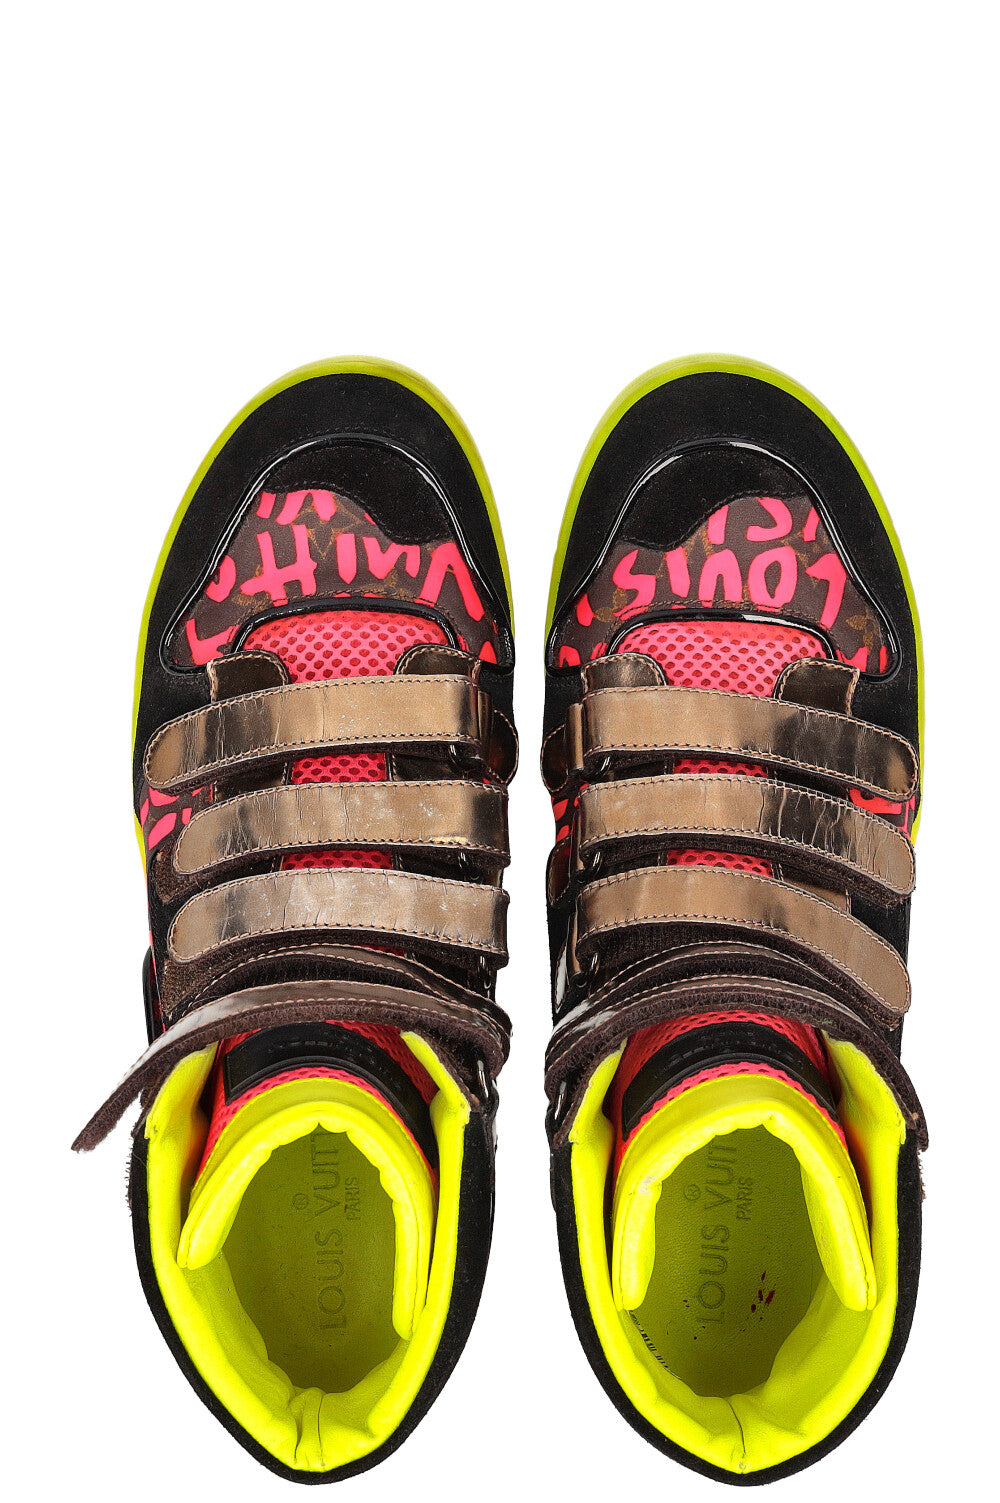 LOUIS VUITTON high-top sneakers Graffiti Steven Sprouse sneakers